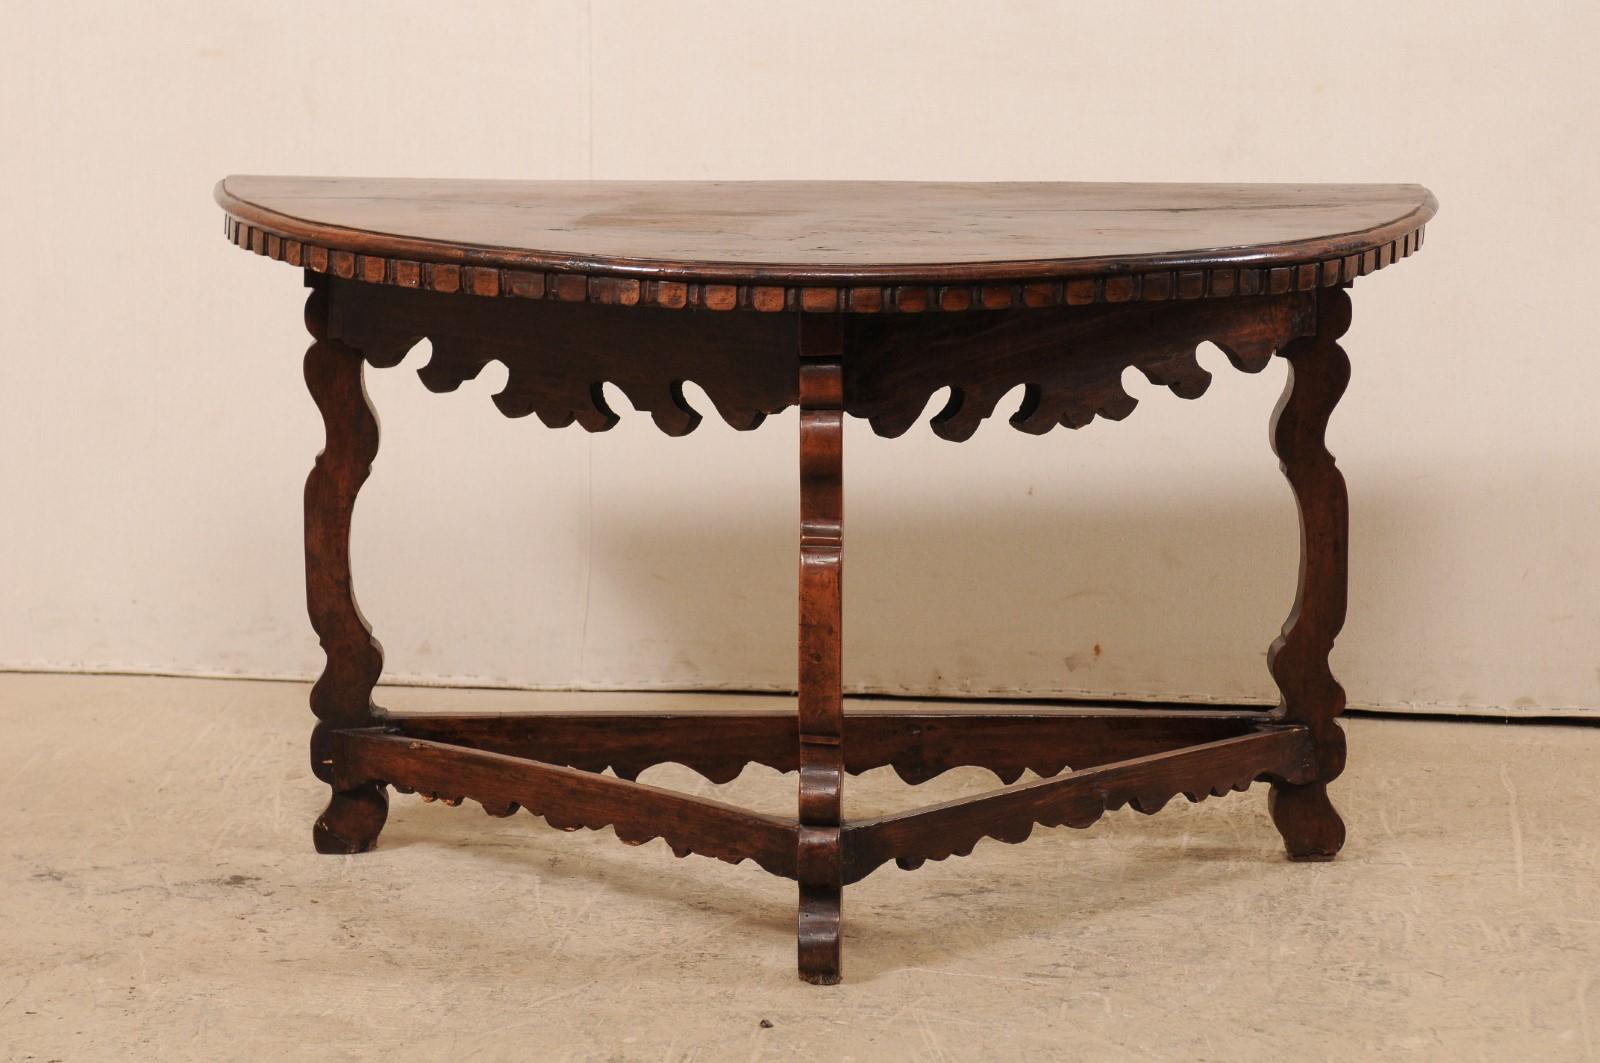 An 18th century Italian carved walnut wood demilune table. This antique demilune table from Italy of walnut wood features a half-moon shaped top accented in carved dentil trim just beneath the lip edge, an attractive and heavily carved